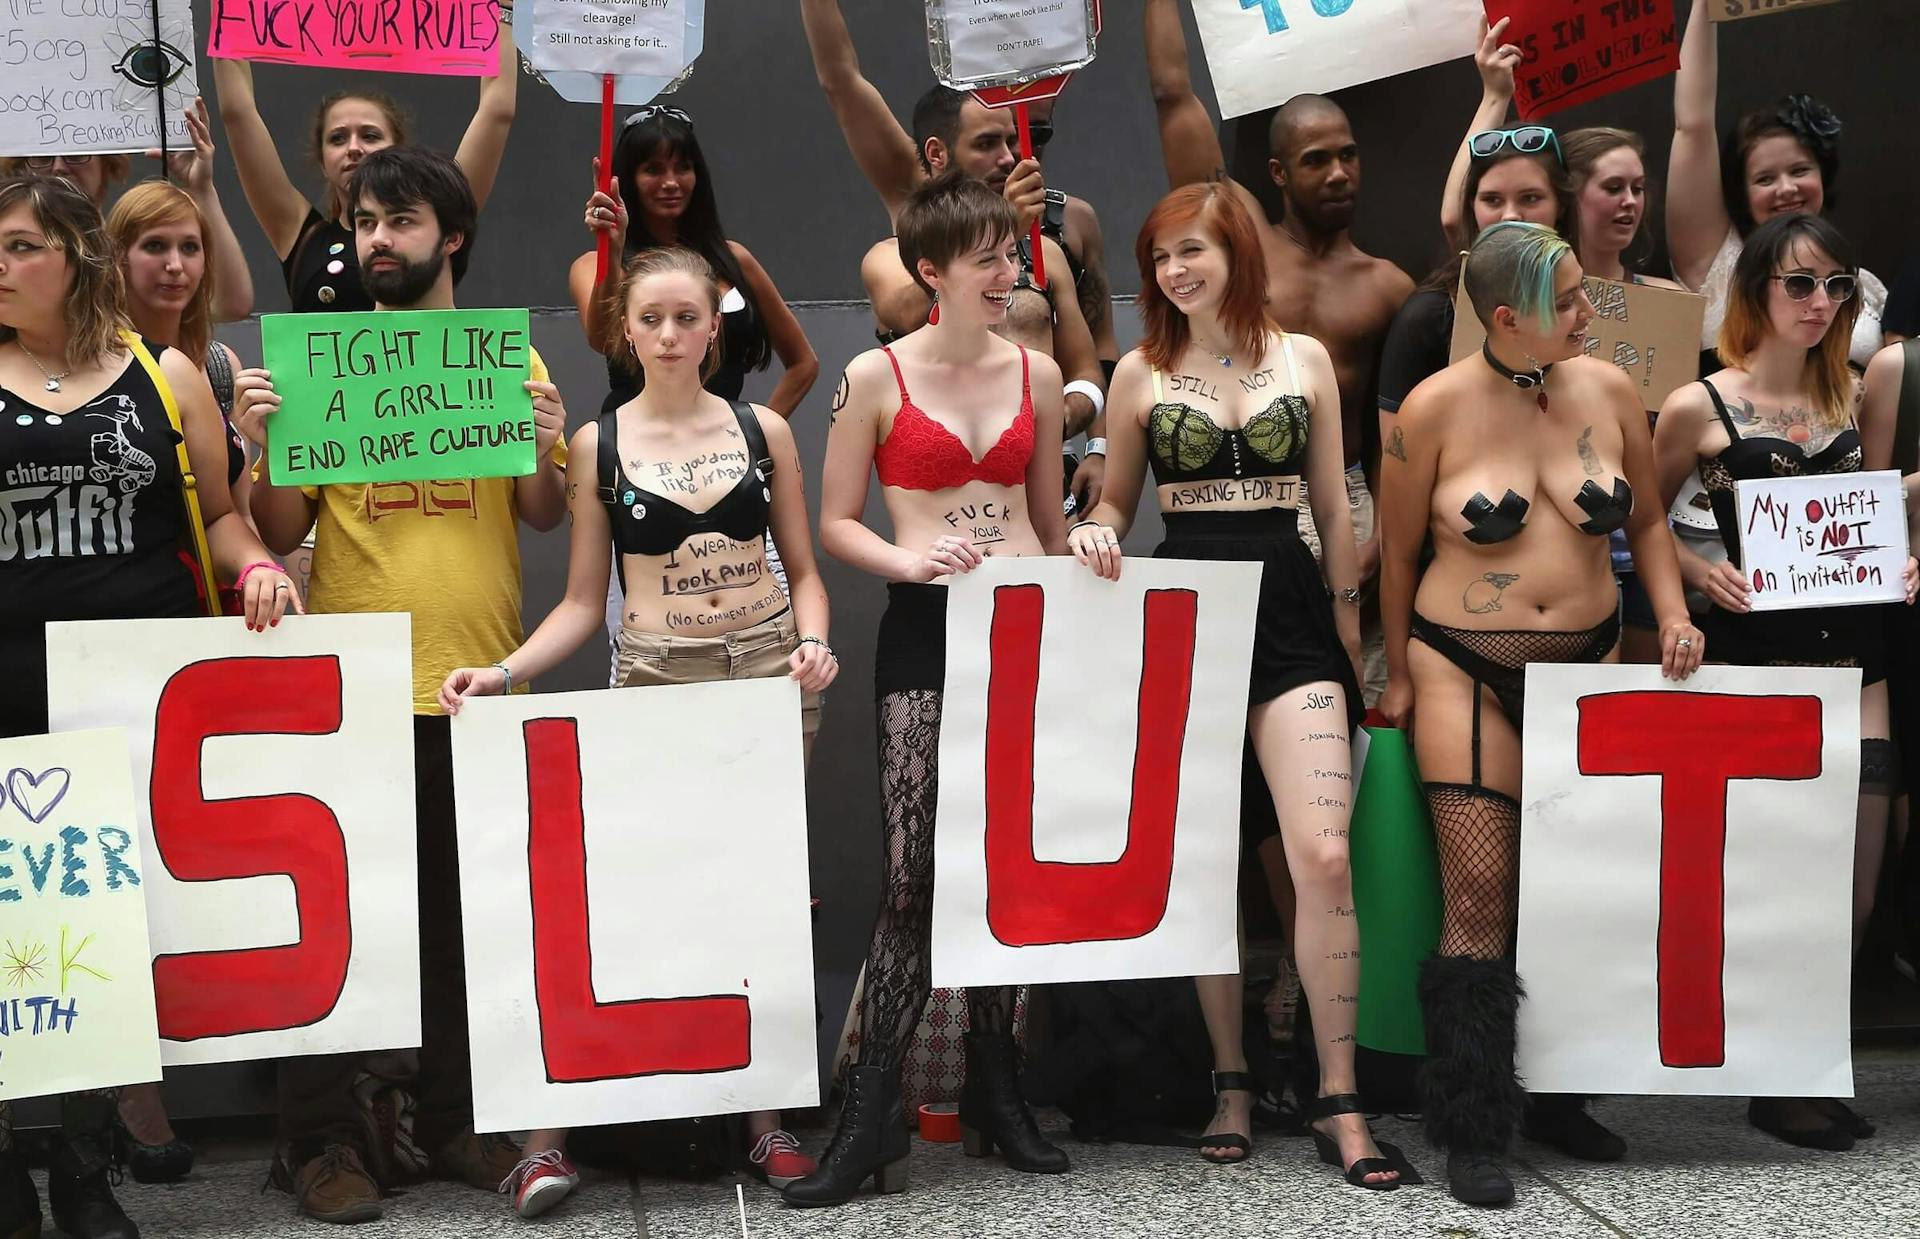 Protesters at a Chicago Slutwalk demonstration in 2013 (Scott Olson/Getty Images) 